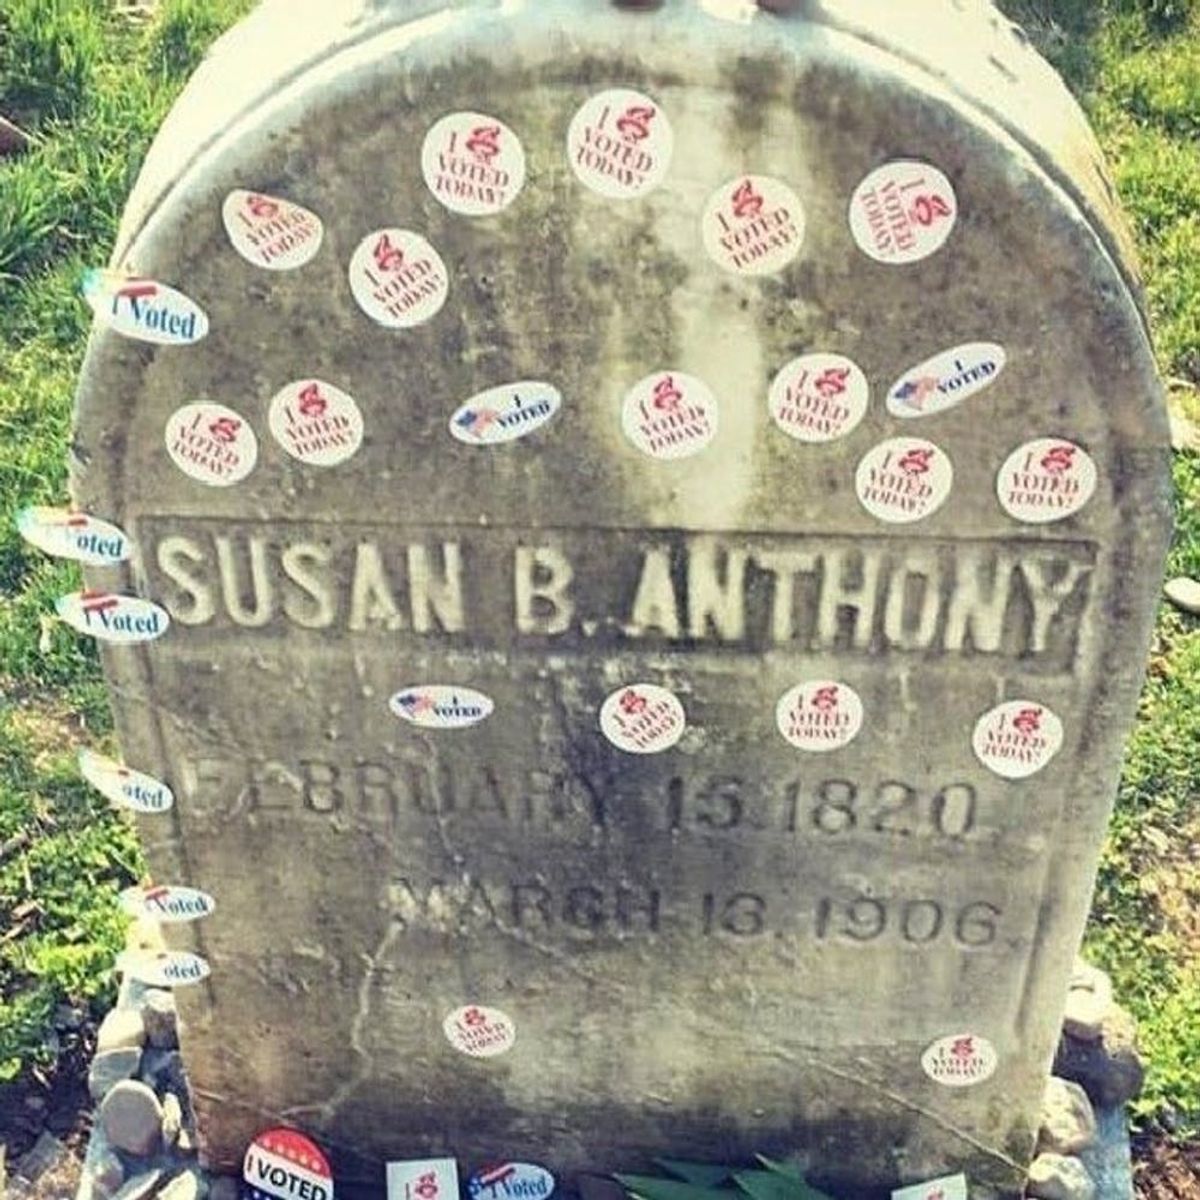 #ElectionDay Voters Are Lining Up to Leave #IVoted Stickers on Susan B. Anthony’s Grave